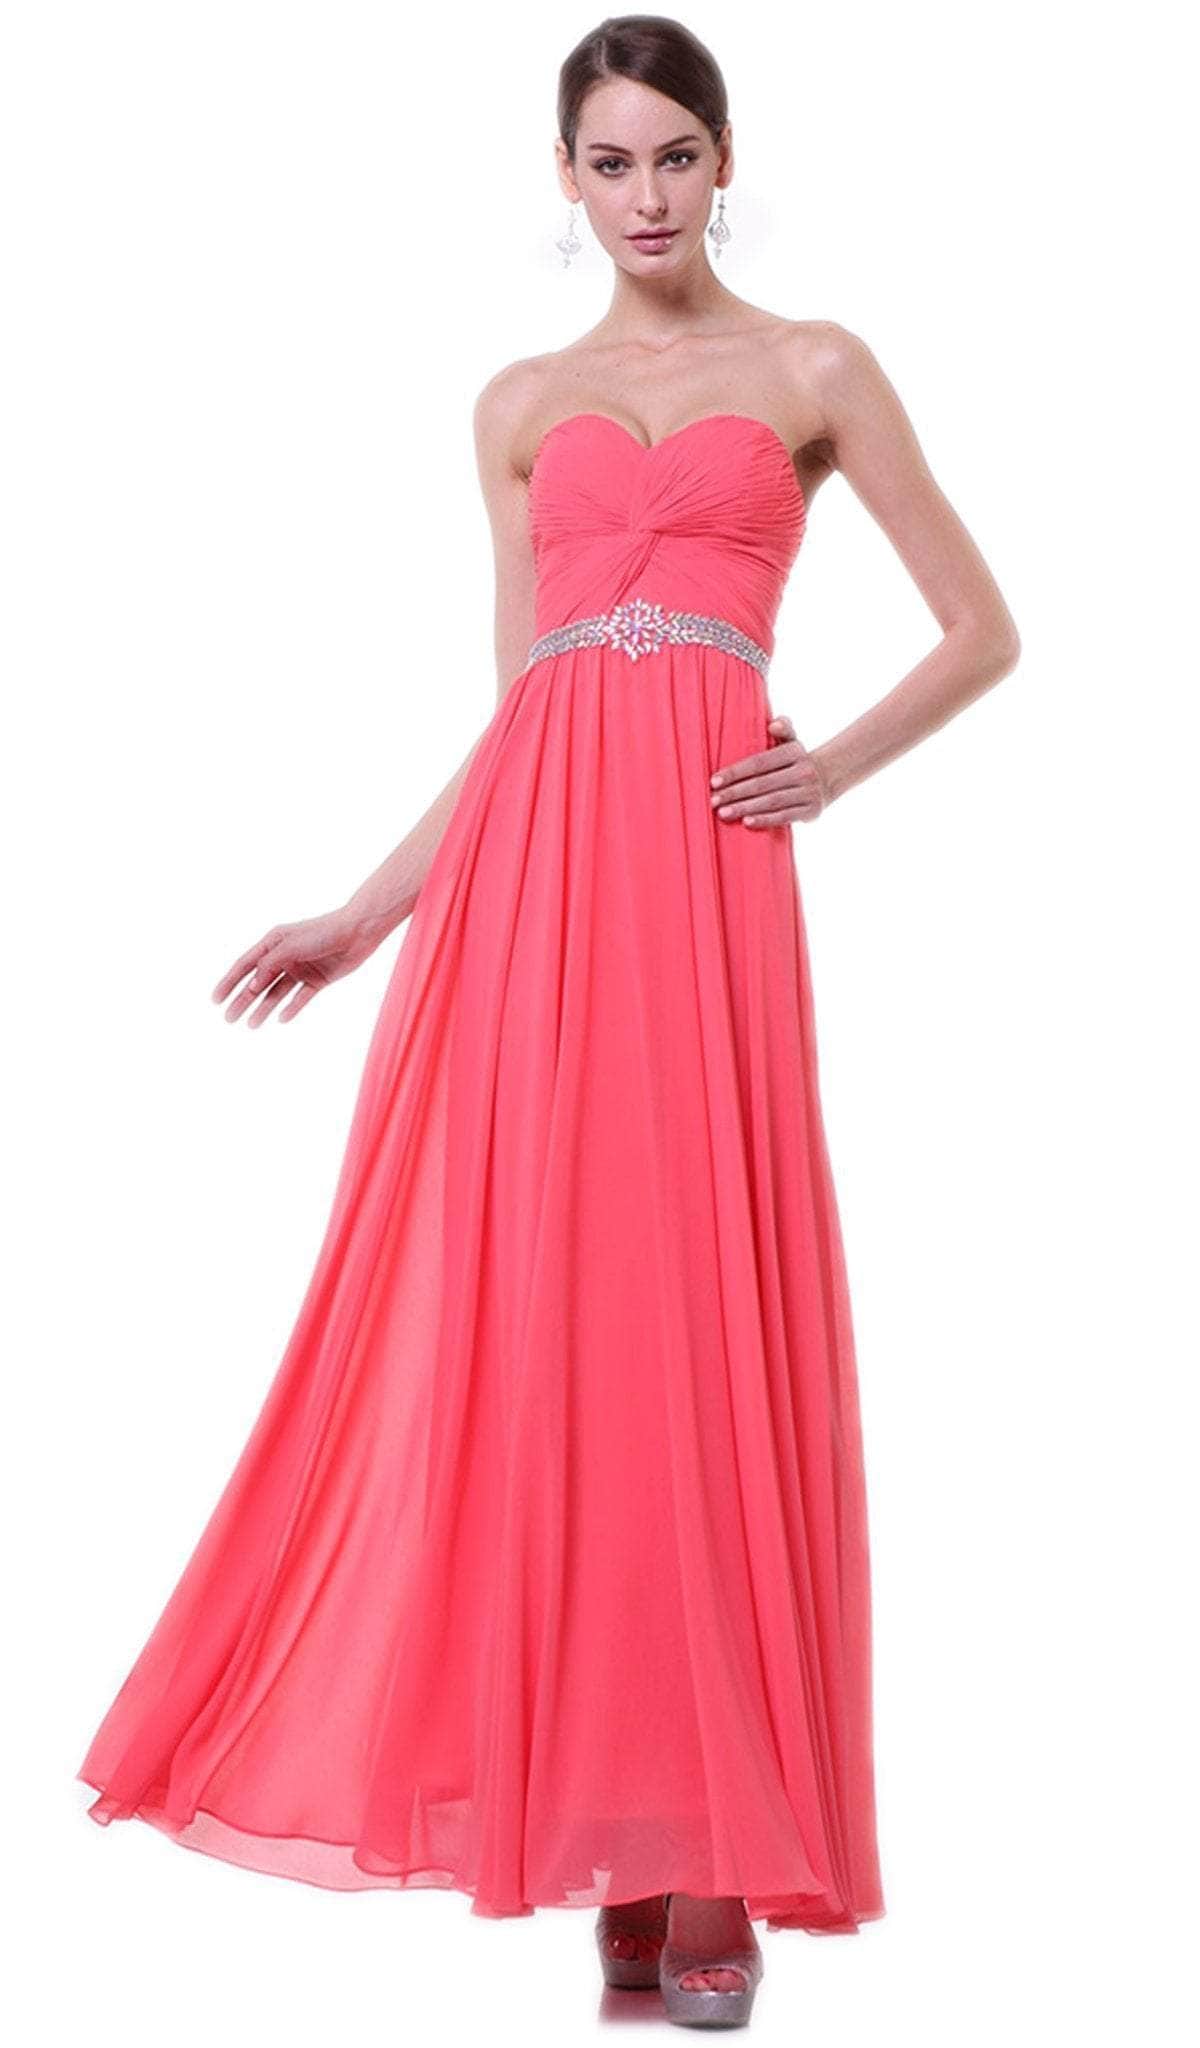 Ladivine CJ87 - Twisted Ruched Sweetheart Affordable Prom Dress
